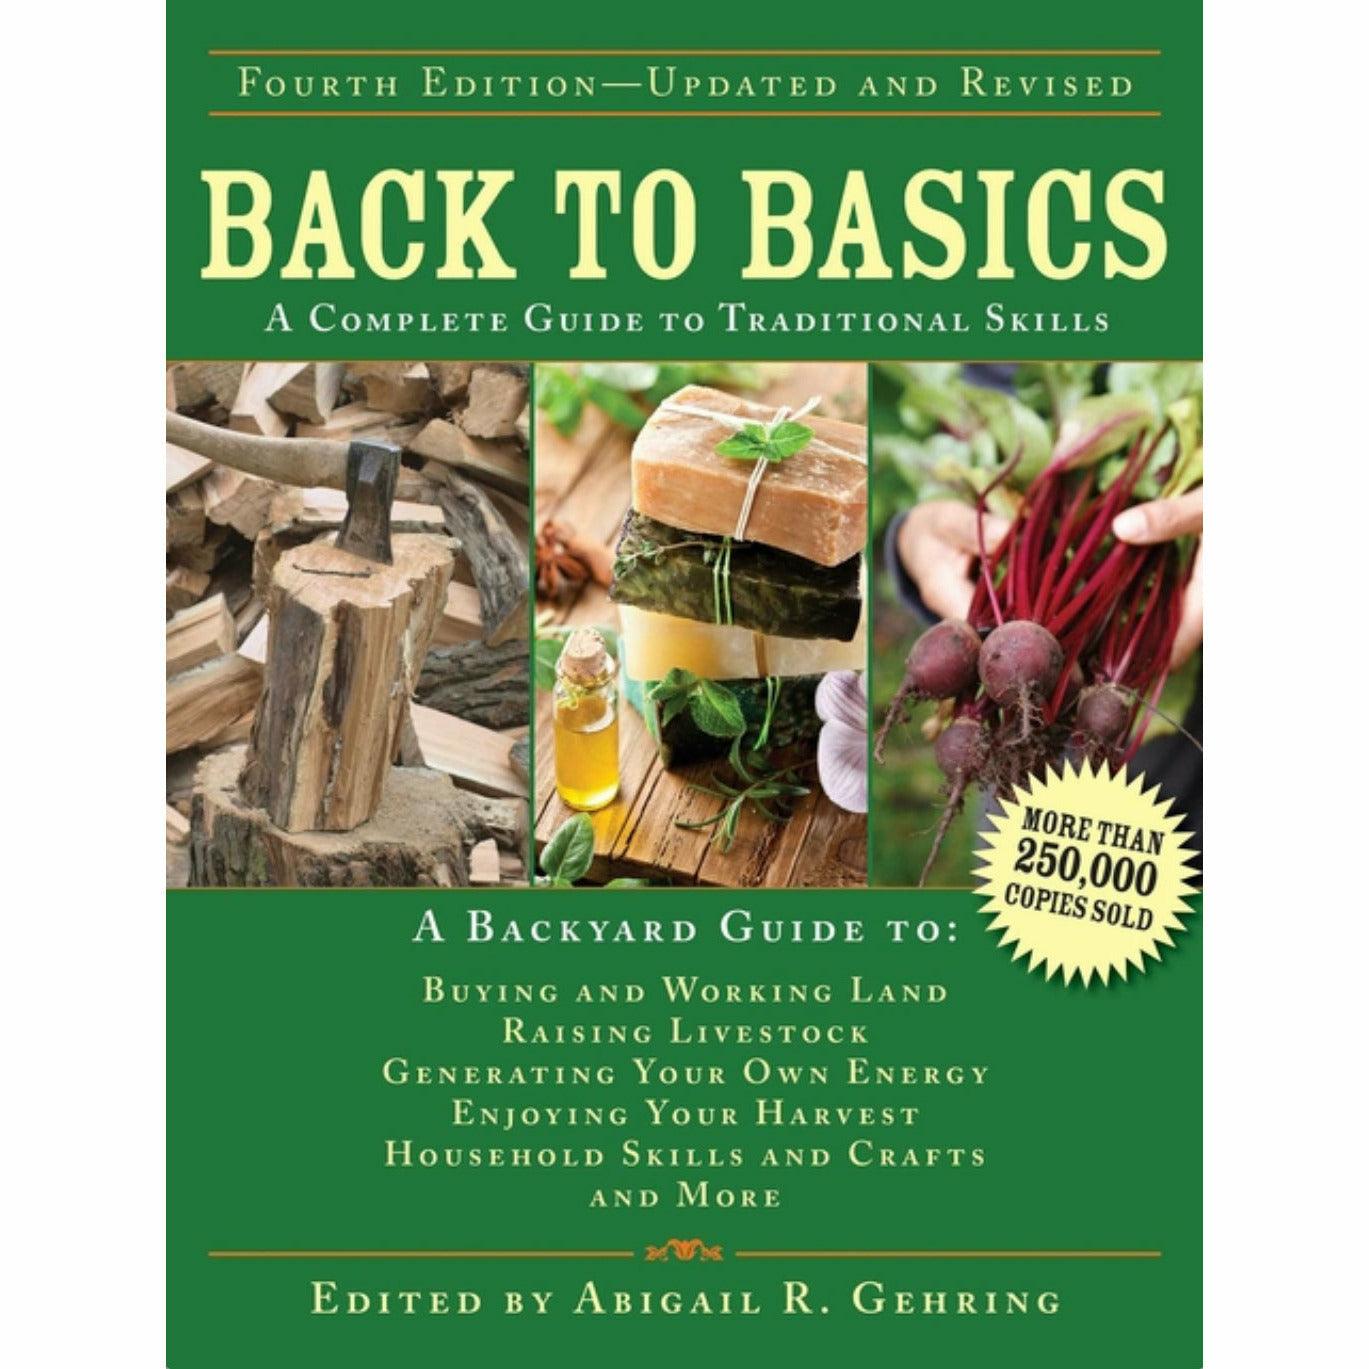 Back to Basics A Complete Guide to Traditional Skills, 4th edition - Ninth & Pine